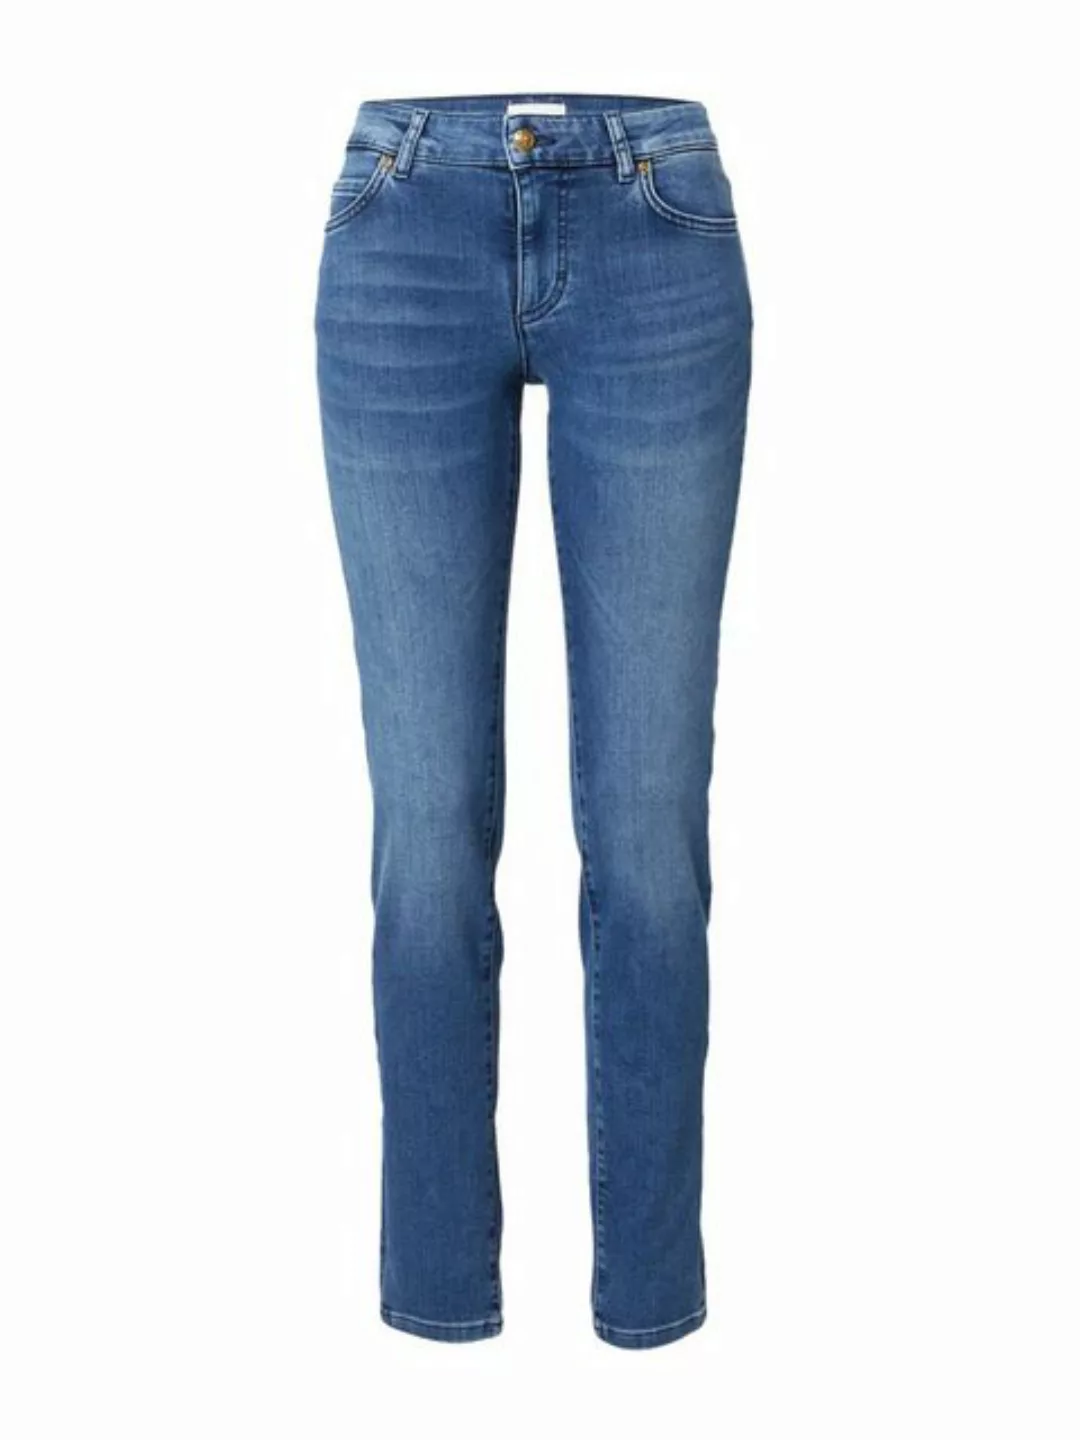 MUSTANG Straight-Jeans "Style Crosby Relaxed Straight" günstig online kaufen